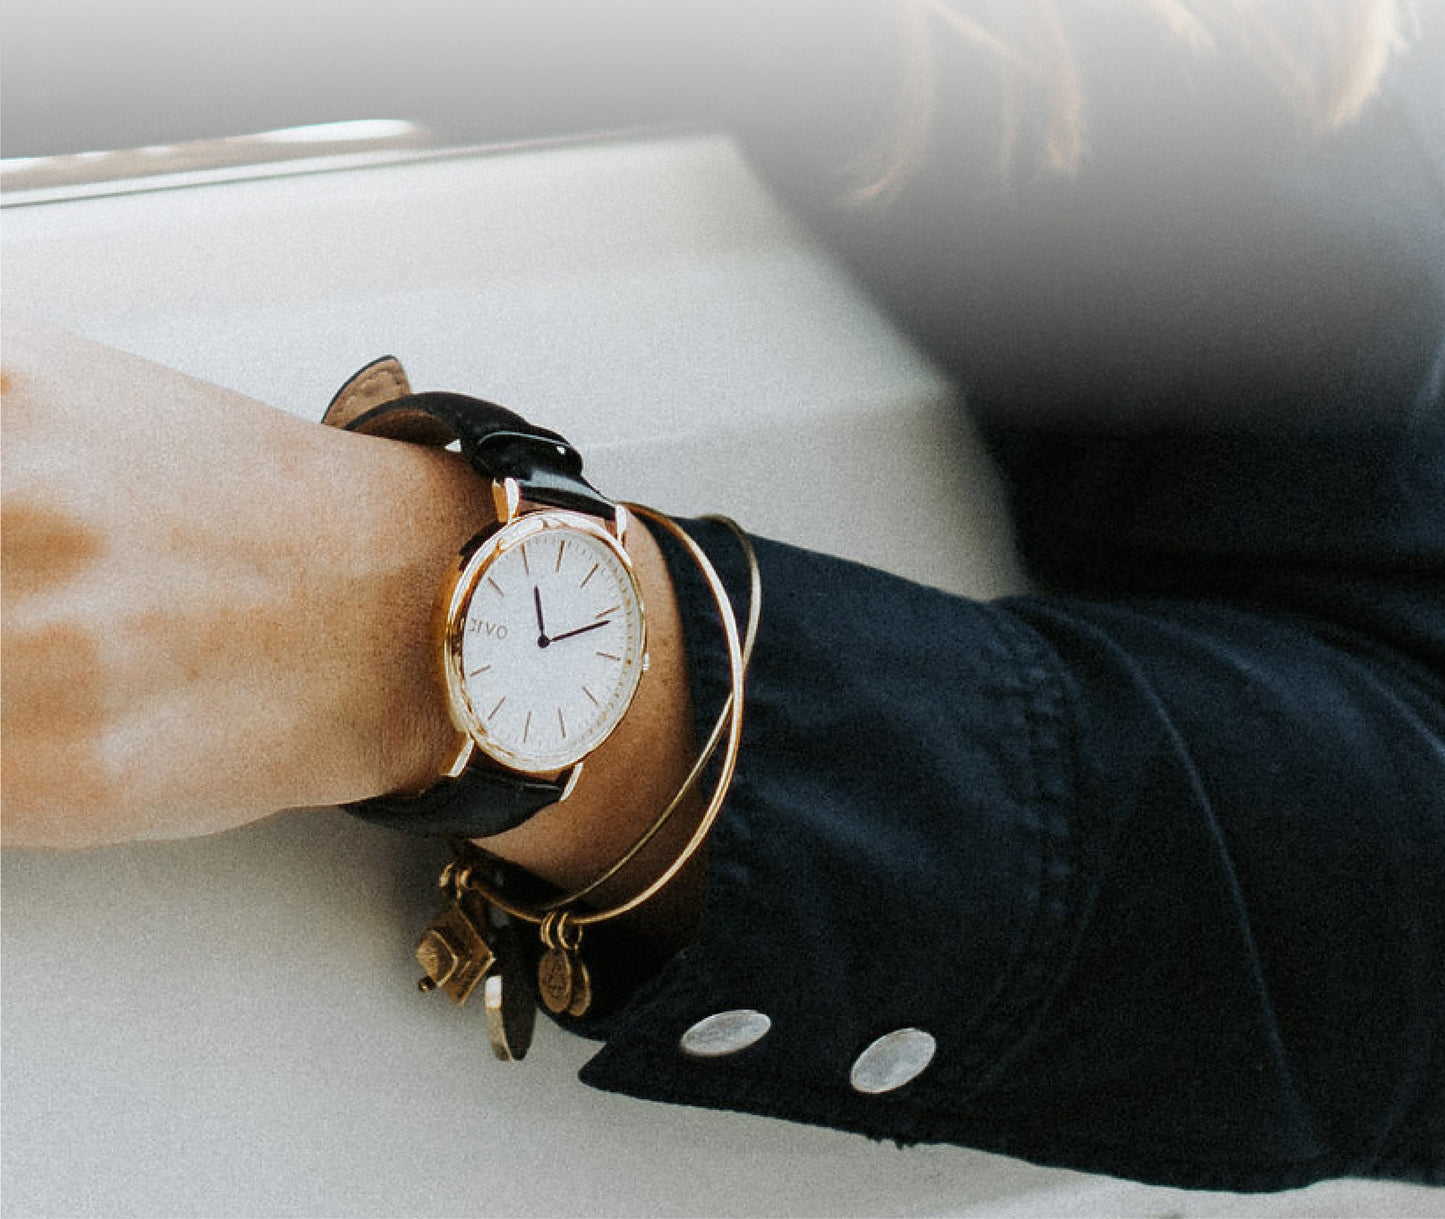 Arvo Time Sawyer Watch with white dial, gold case, and black leather band on a woman's wrist